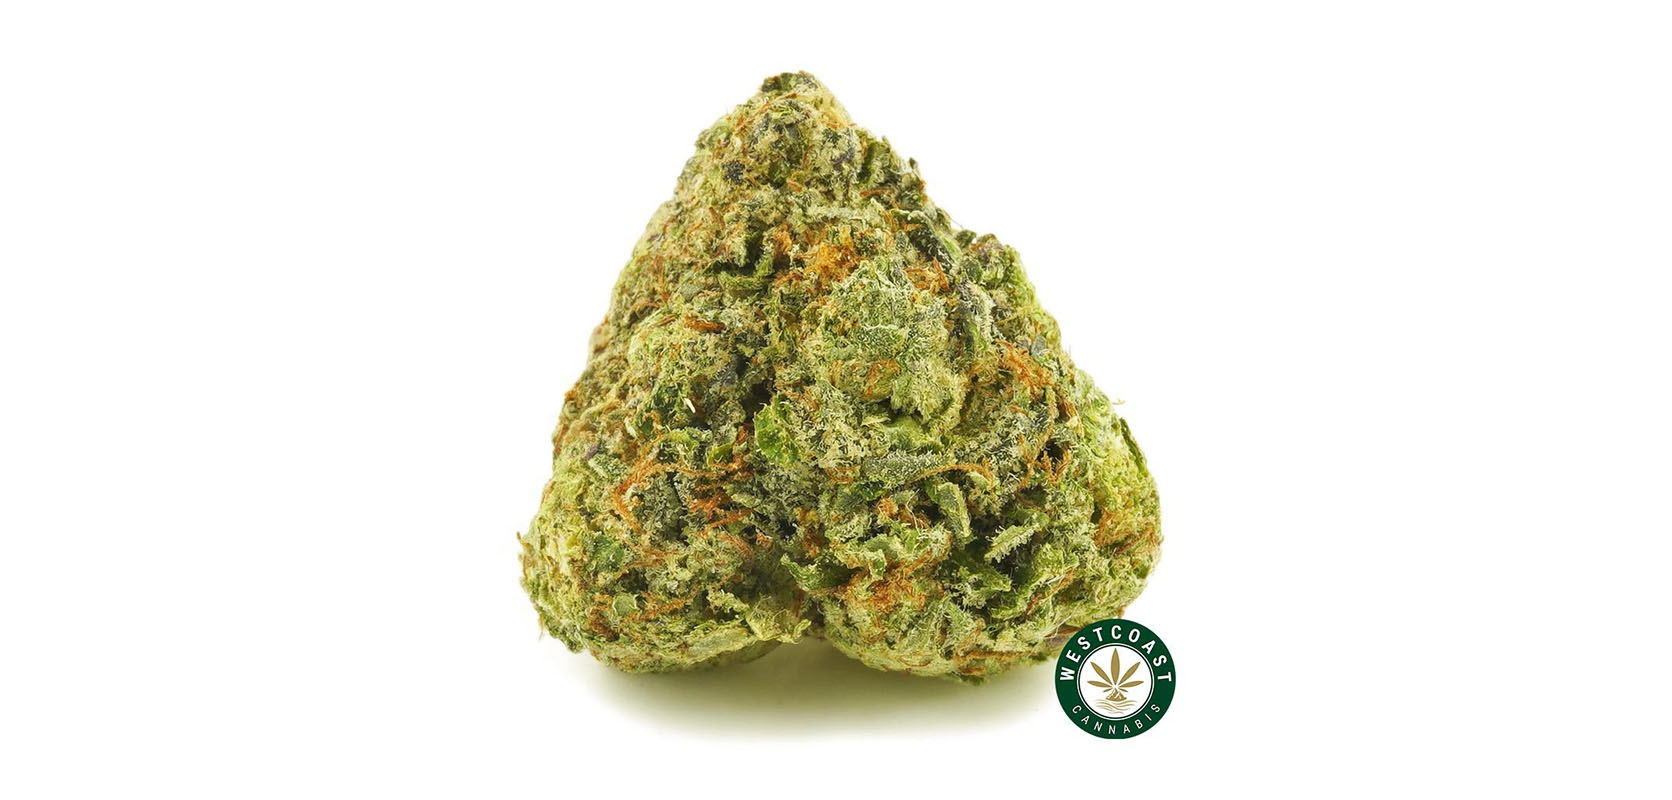 pink kush weed strain for sale online. Buy best indica strains at west coast cannabis mail order marijuana.